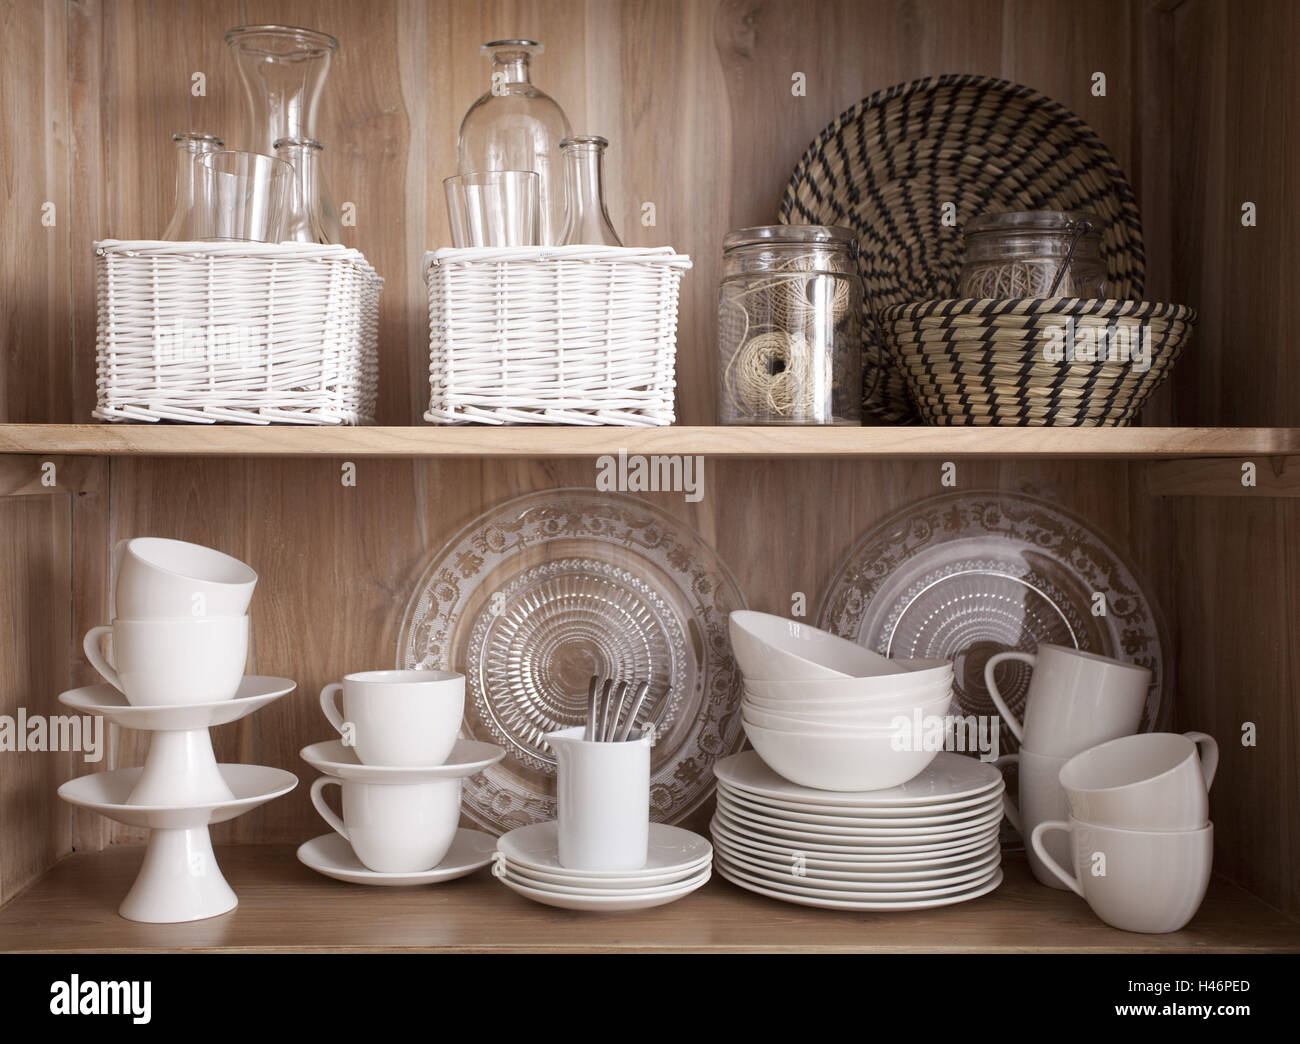 Glasses, dishes, cupboard, baskets, Stock Photo